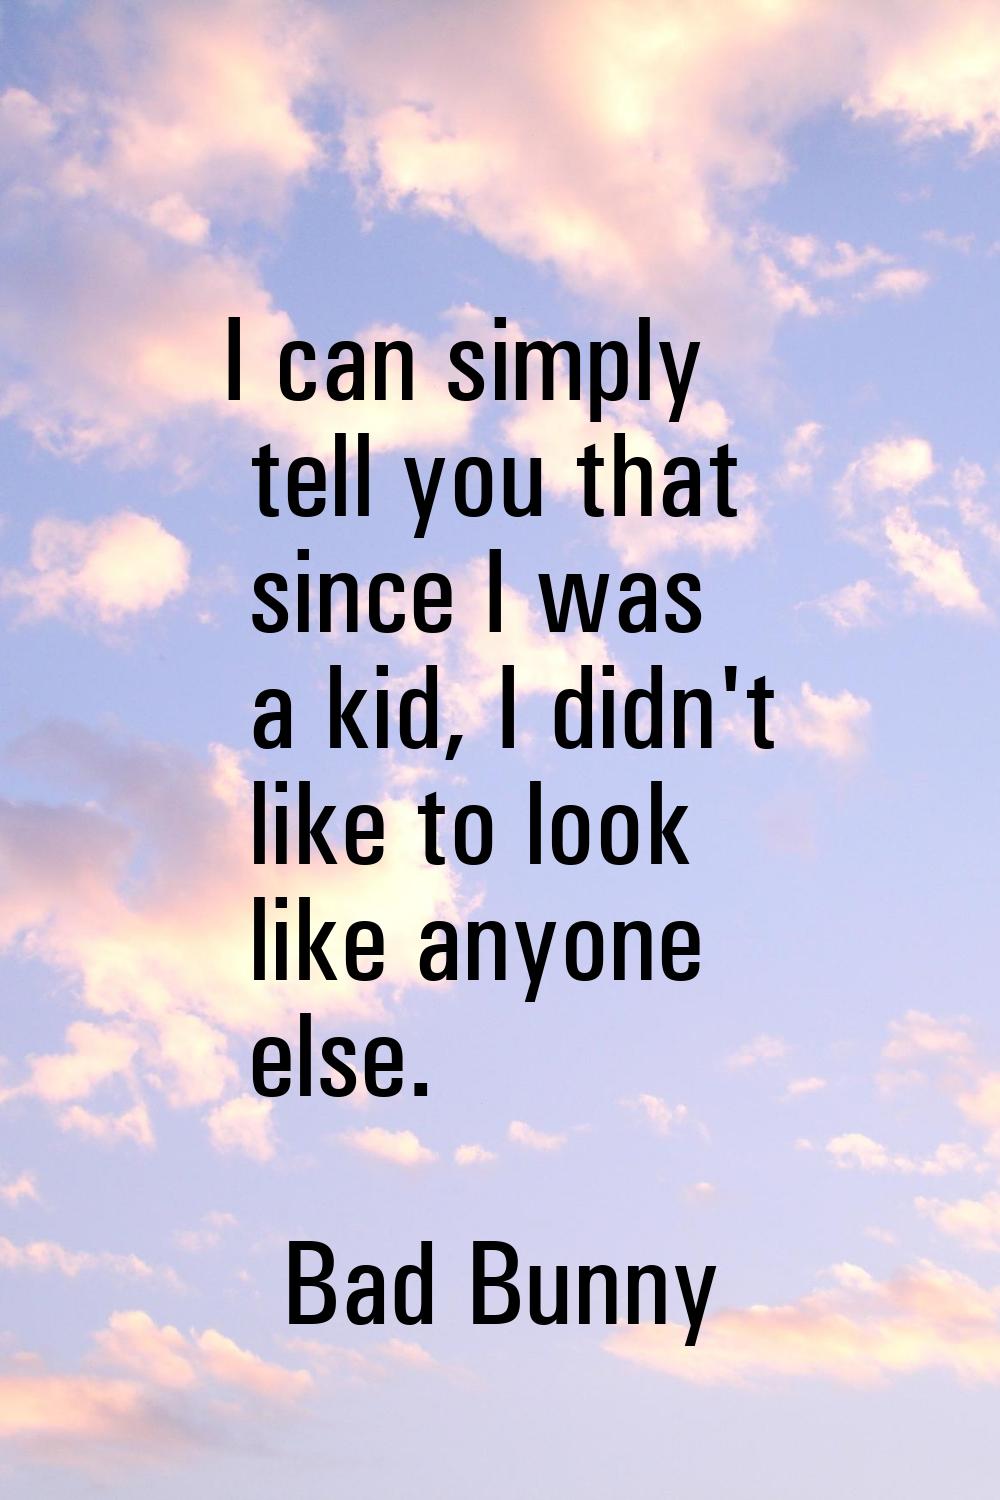 I can simply tell you that since I was a kid, I didn't like to look like anyone else.